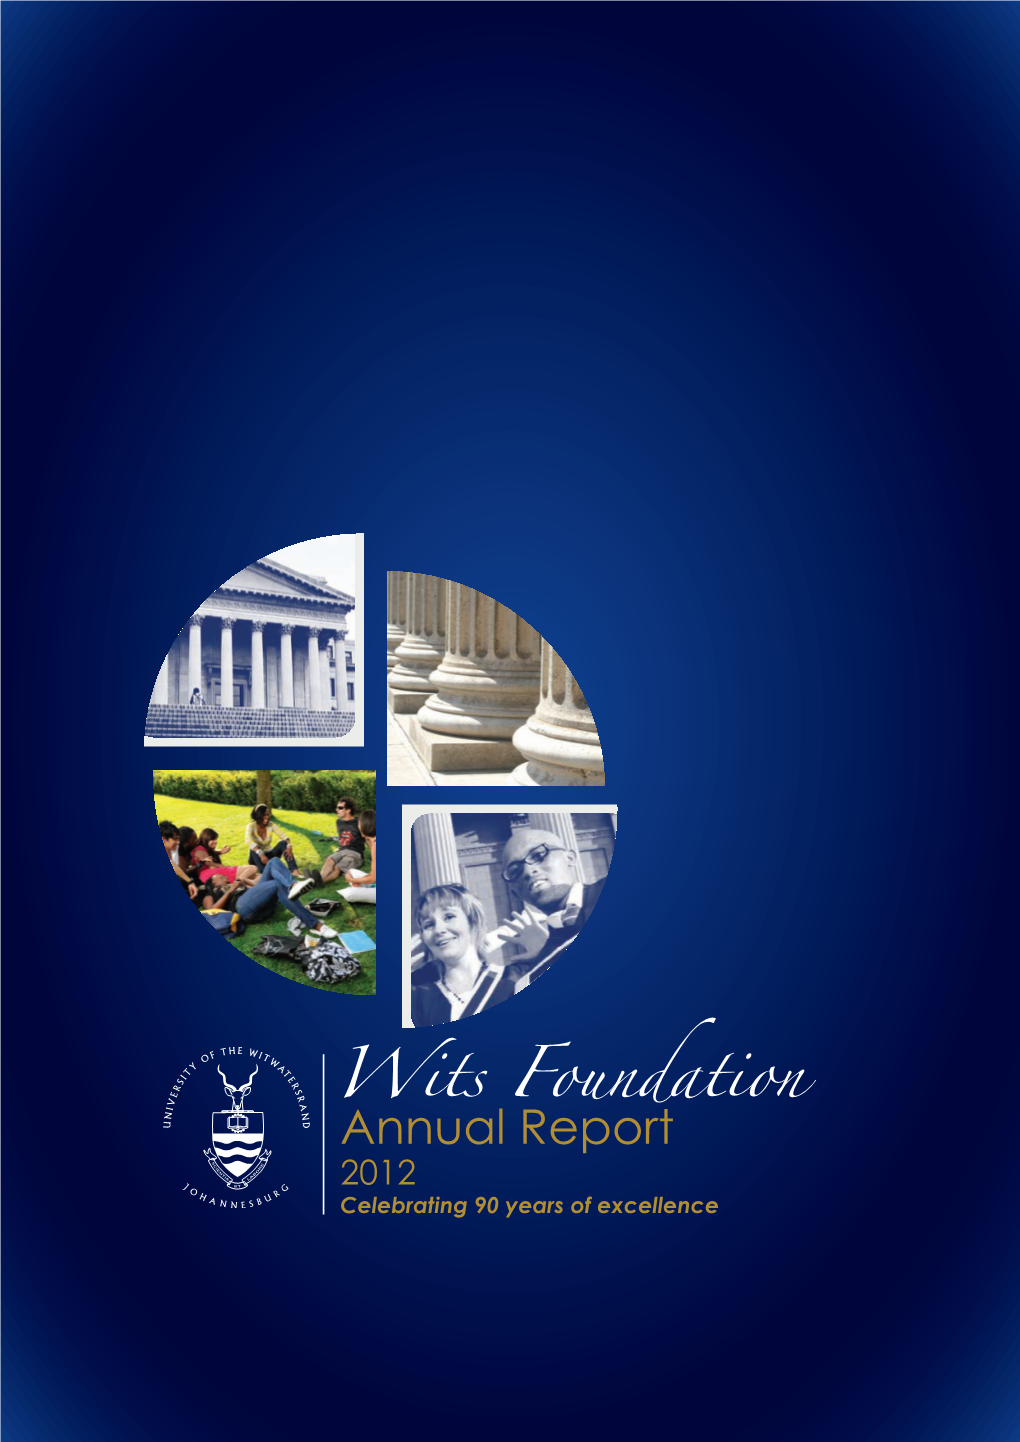 Annual Report Is Once Again Dedicated